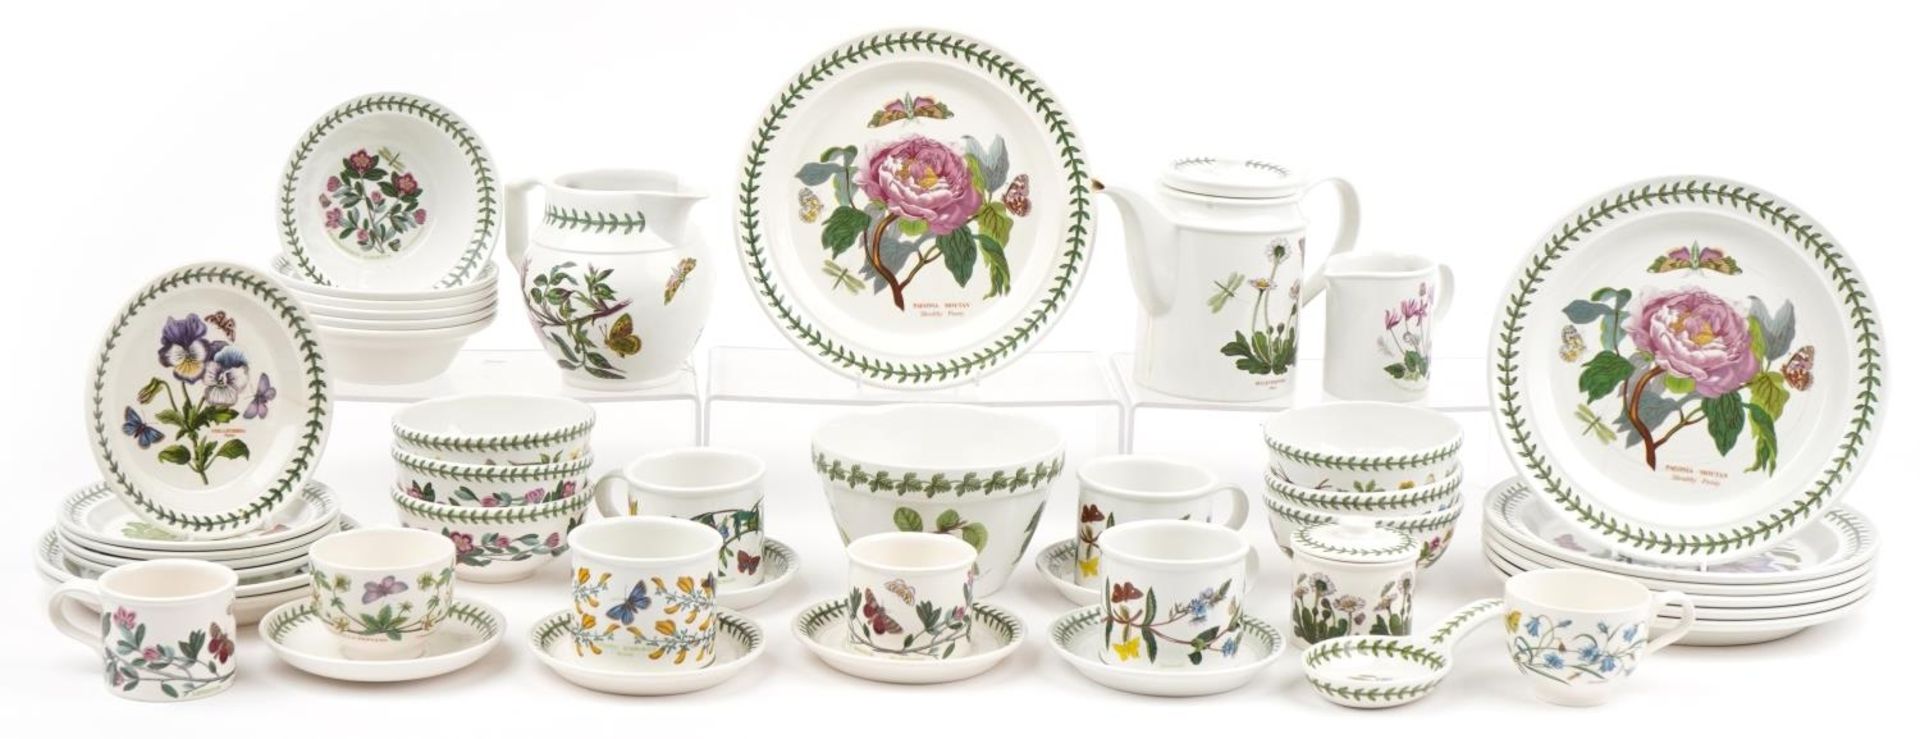 Portmeirion Botanic Garden and Pomona collectable china and dinnerware including teapot, cups and